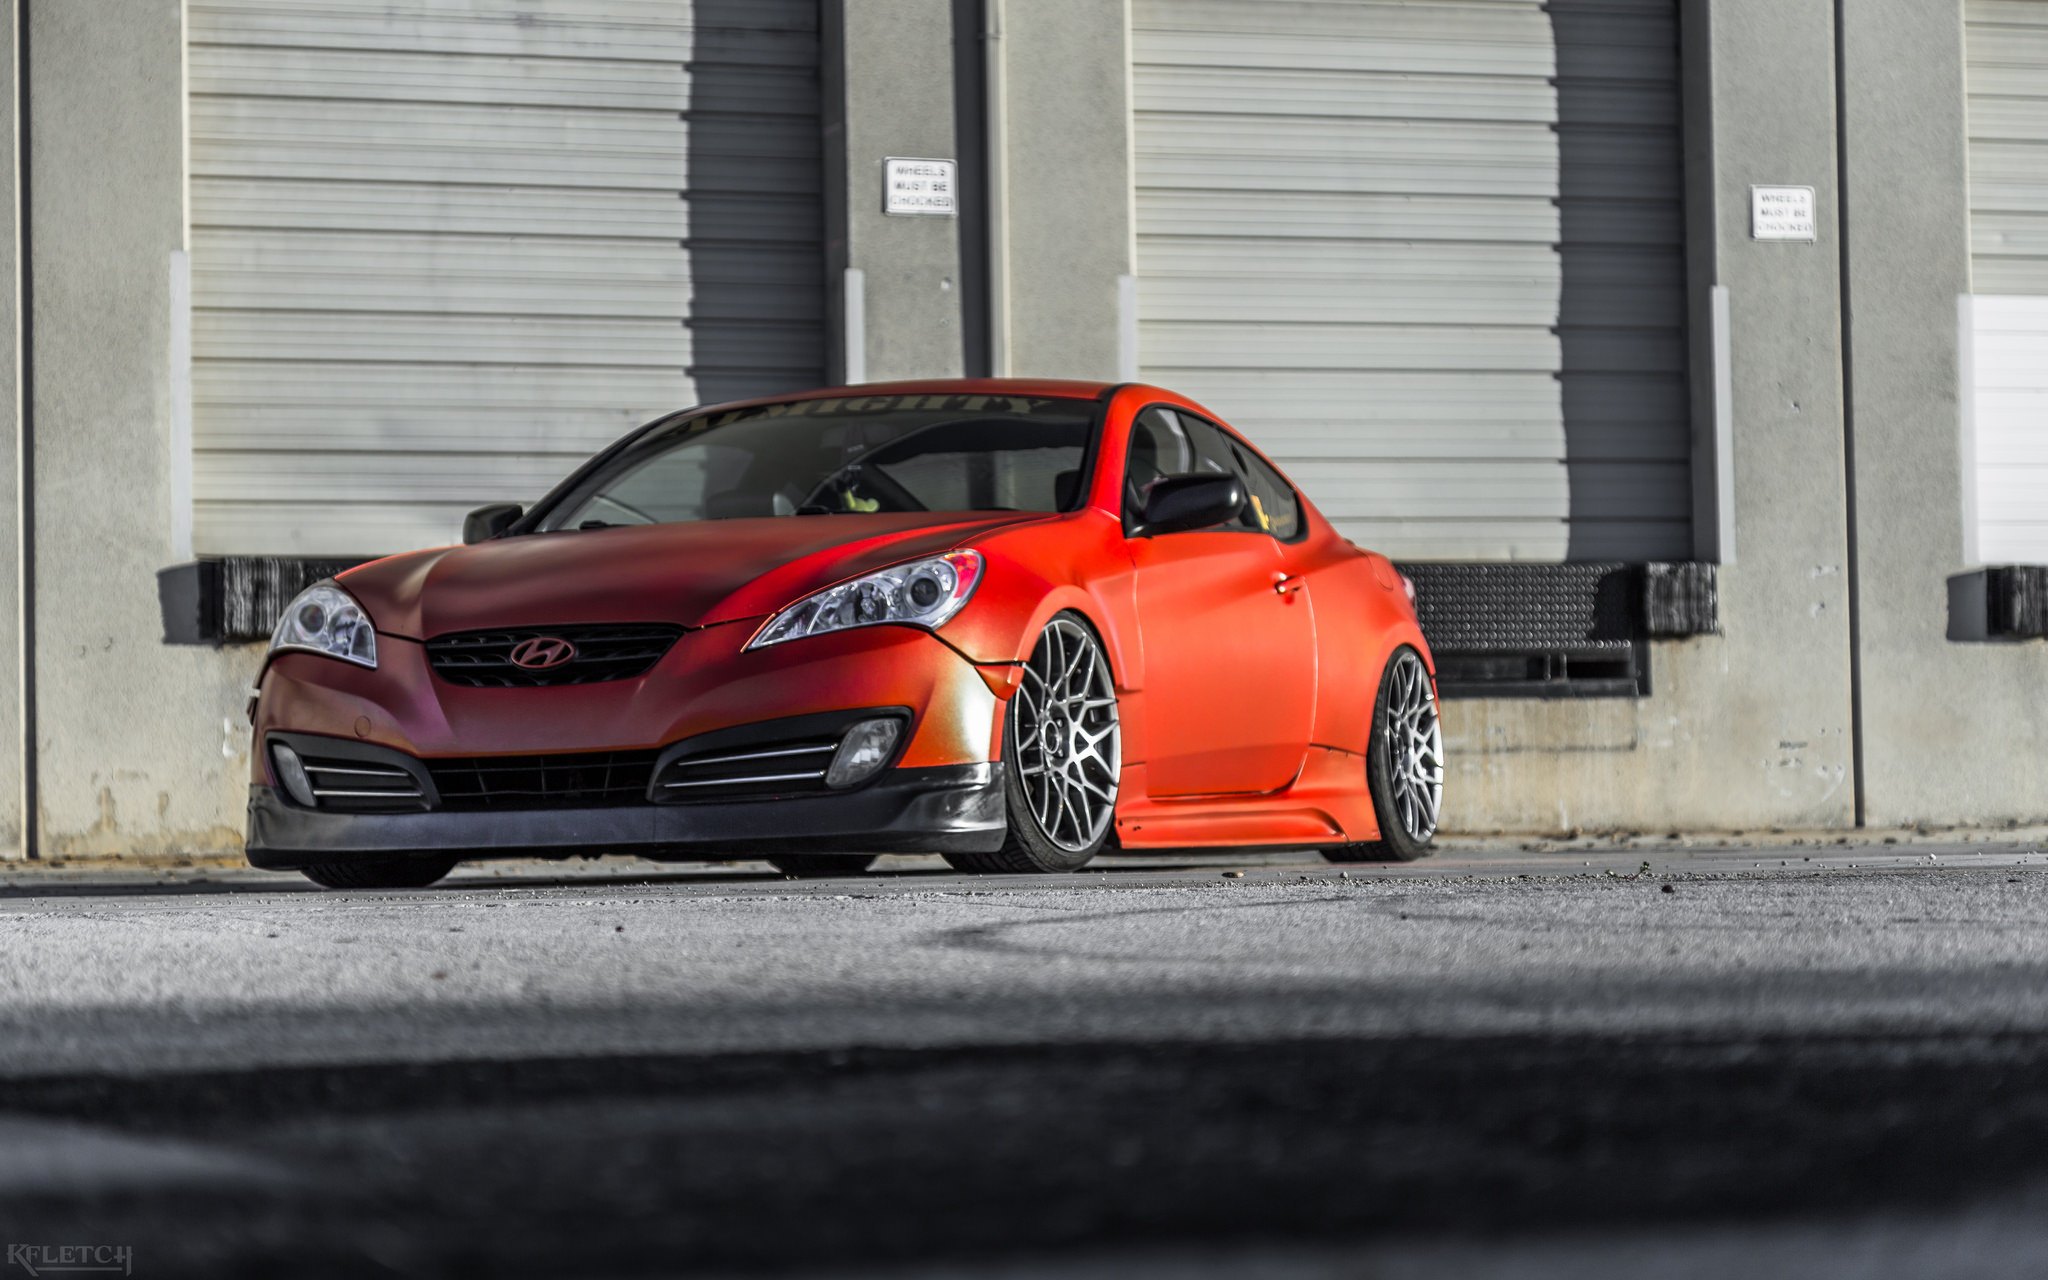 Chrystal Clear Headlights on Red Hyundai Genesis Coupe - Photo by kyle Fletcher